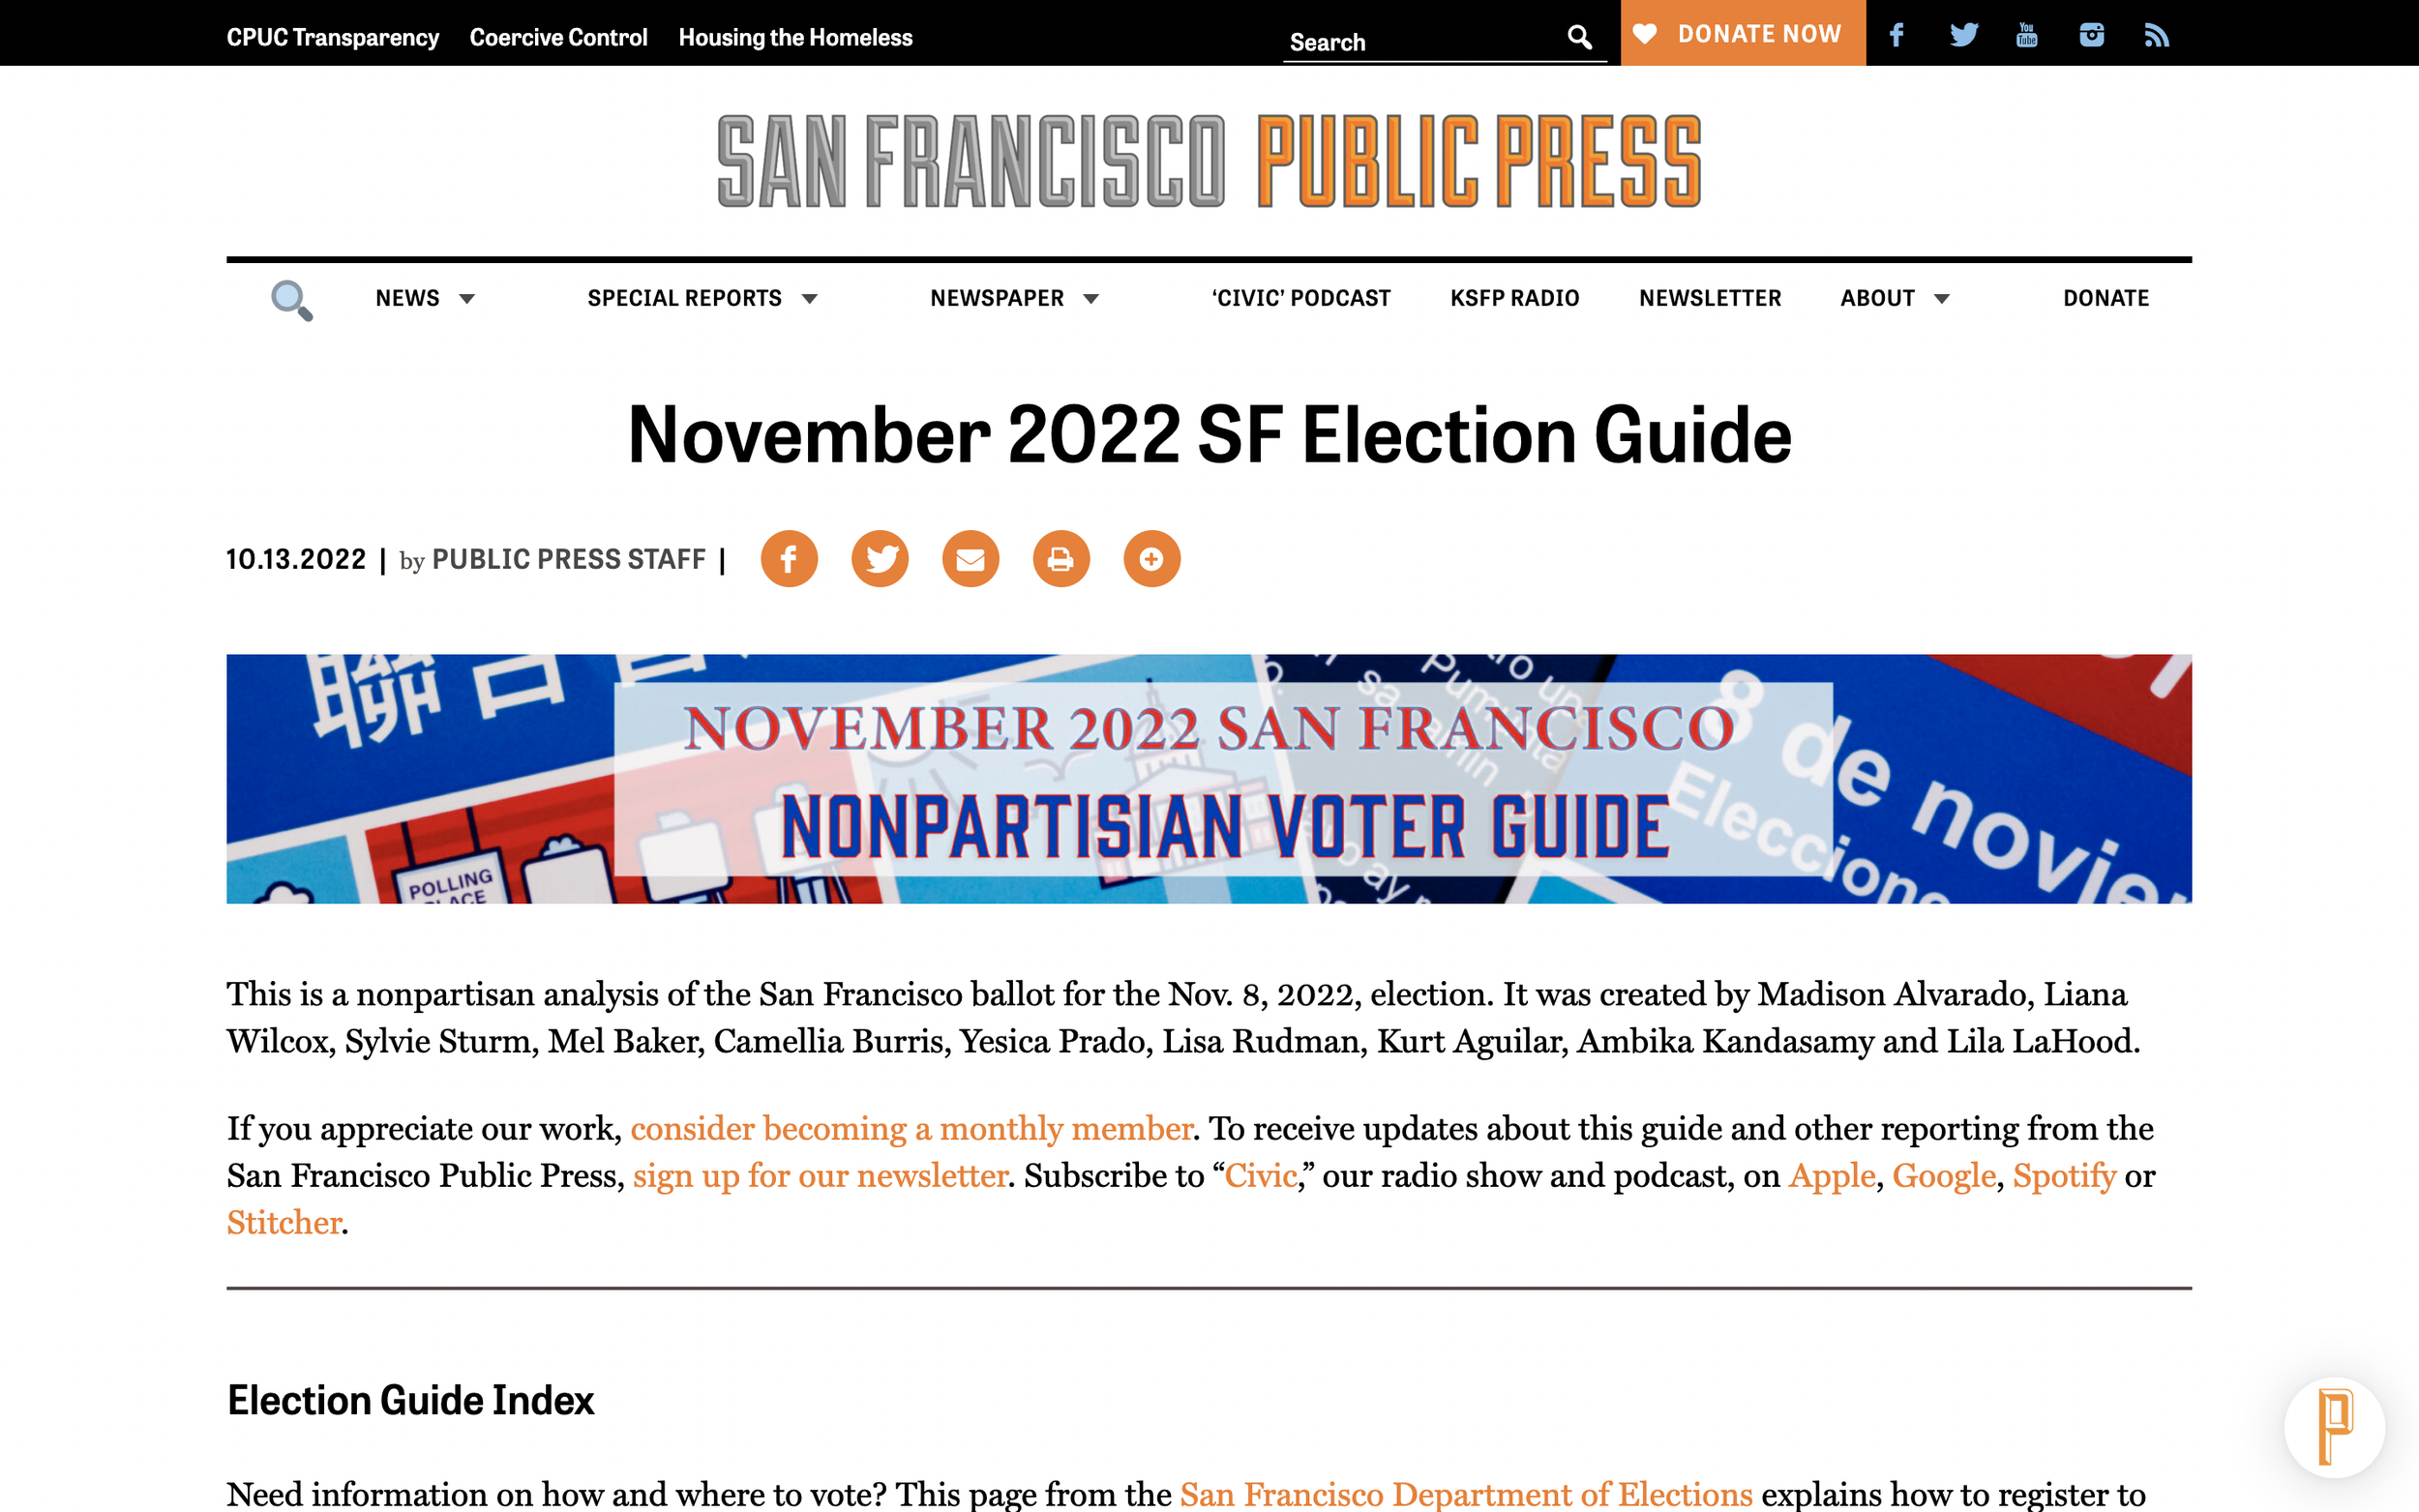 SFPP 2022ElectionGuide2.png